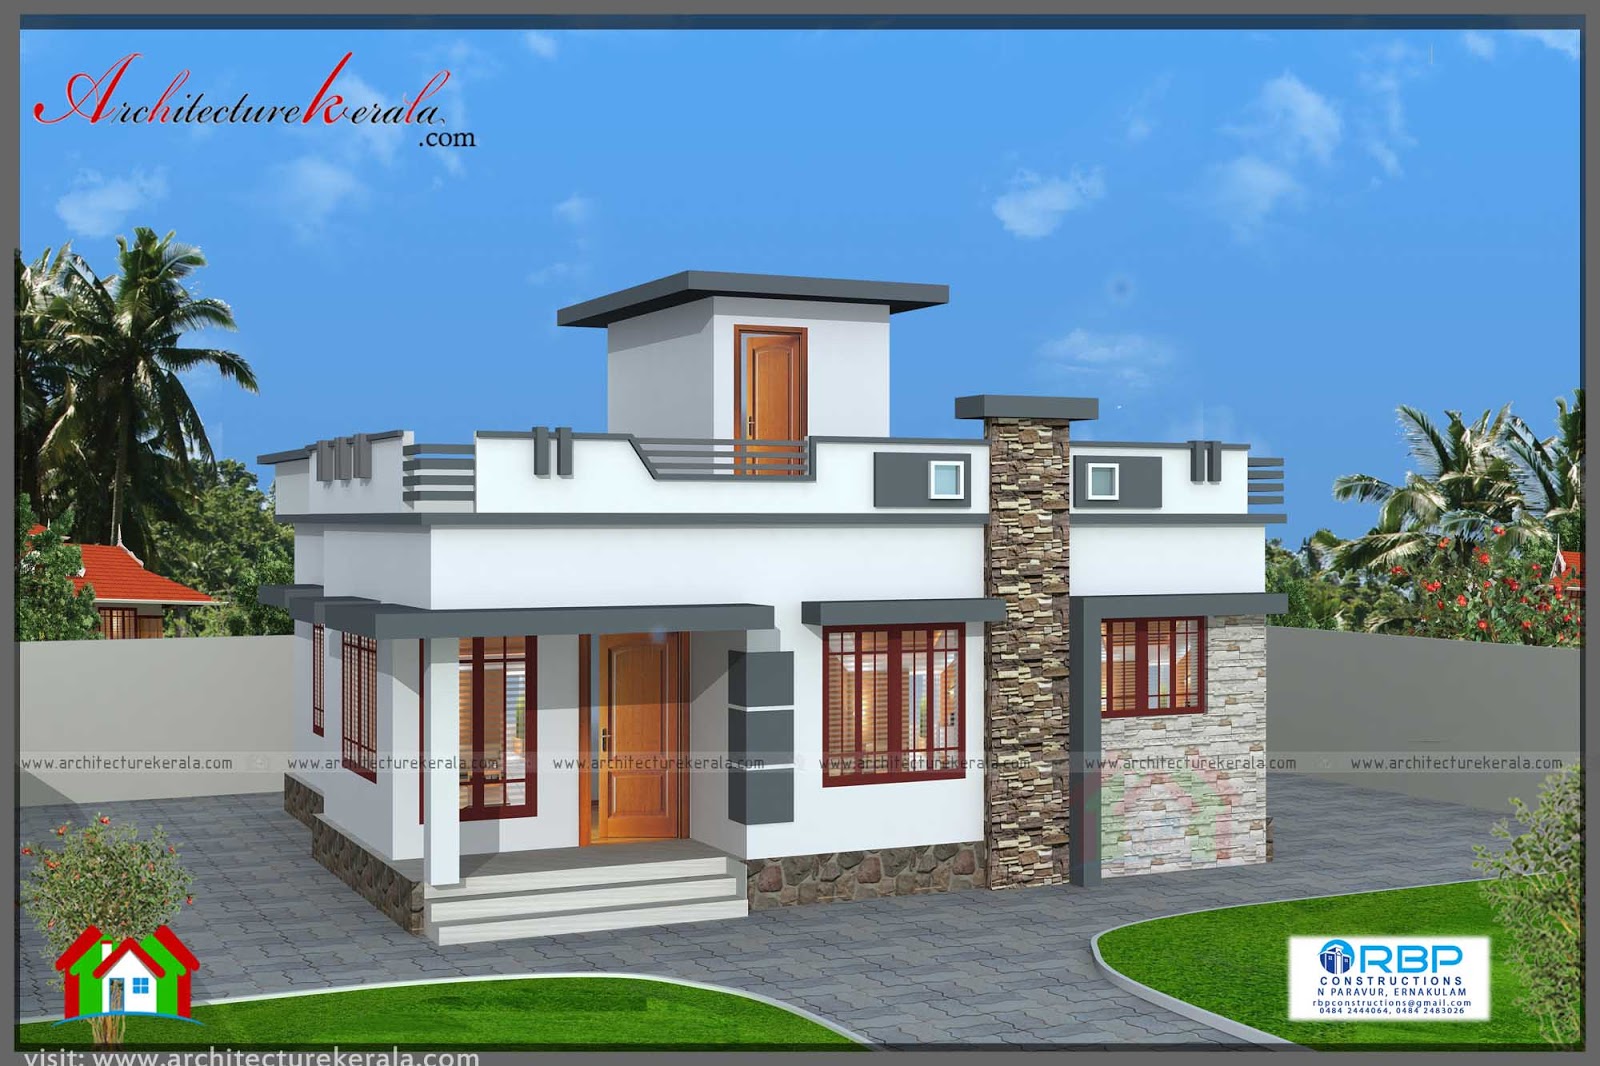  700  SQFT PLAN  AND ELEVATION FOR MIDDLE CLASS FAMILY 